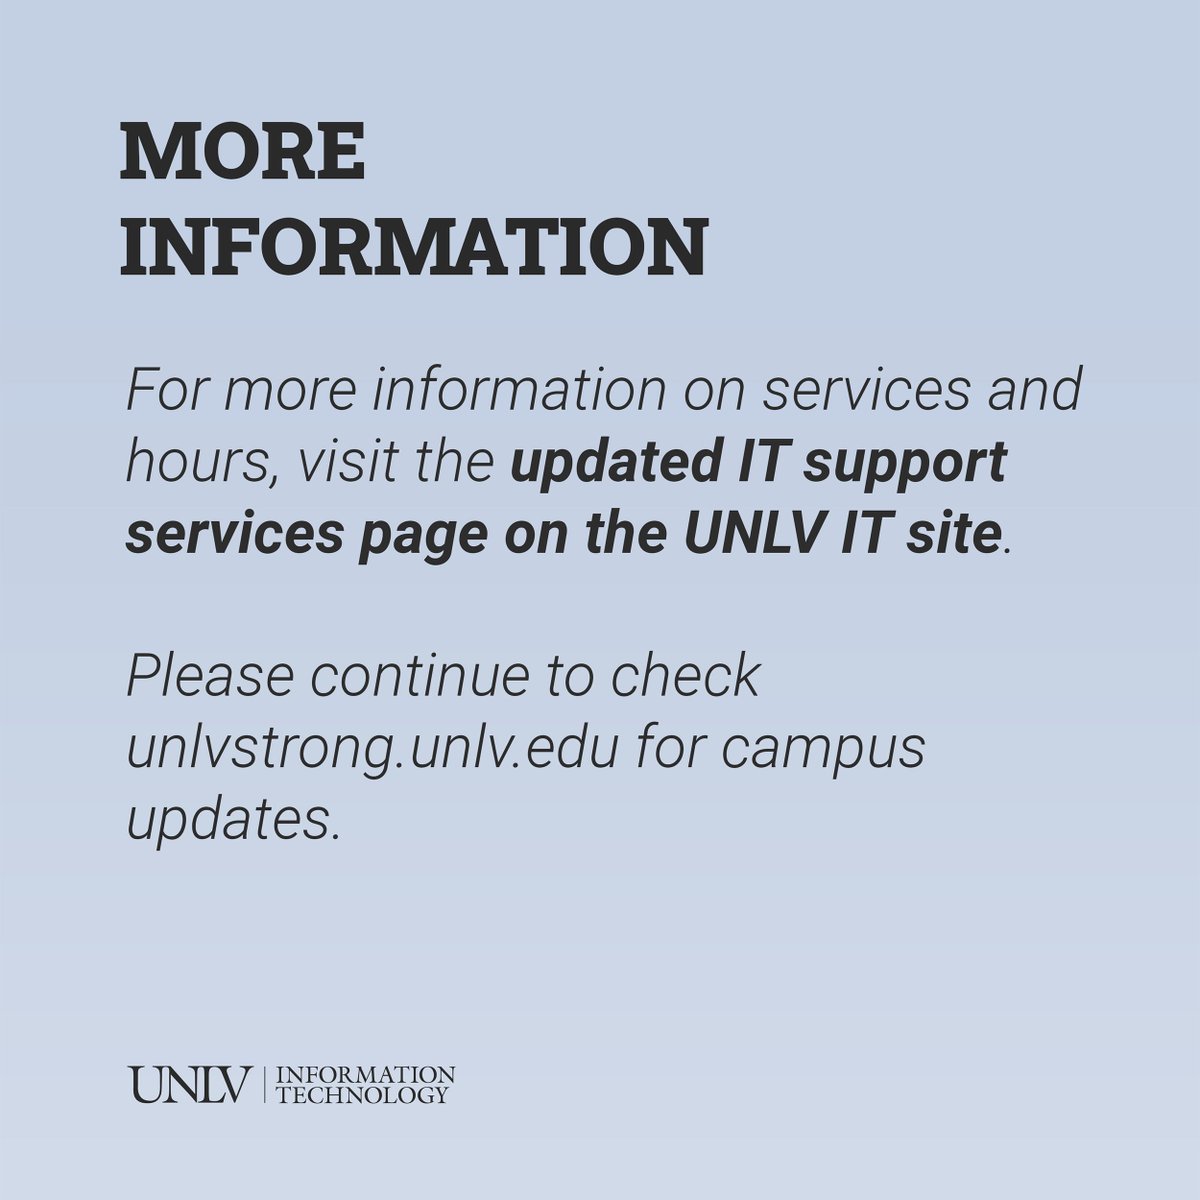 Starting Dec. 11, in-person support for the IT Help Desk, computer labs, and RebelCard will be offered in the Lied Library for @UNLV students, faculty, and staff. Visit the #UNLVIT support services webpage and unlvstrong.unlv.edu for additional campus updates.